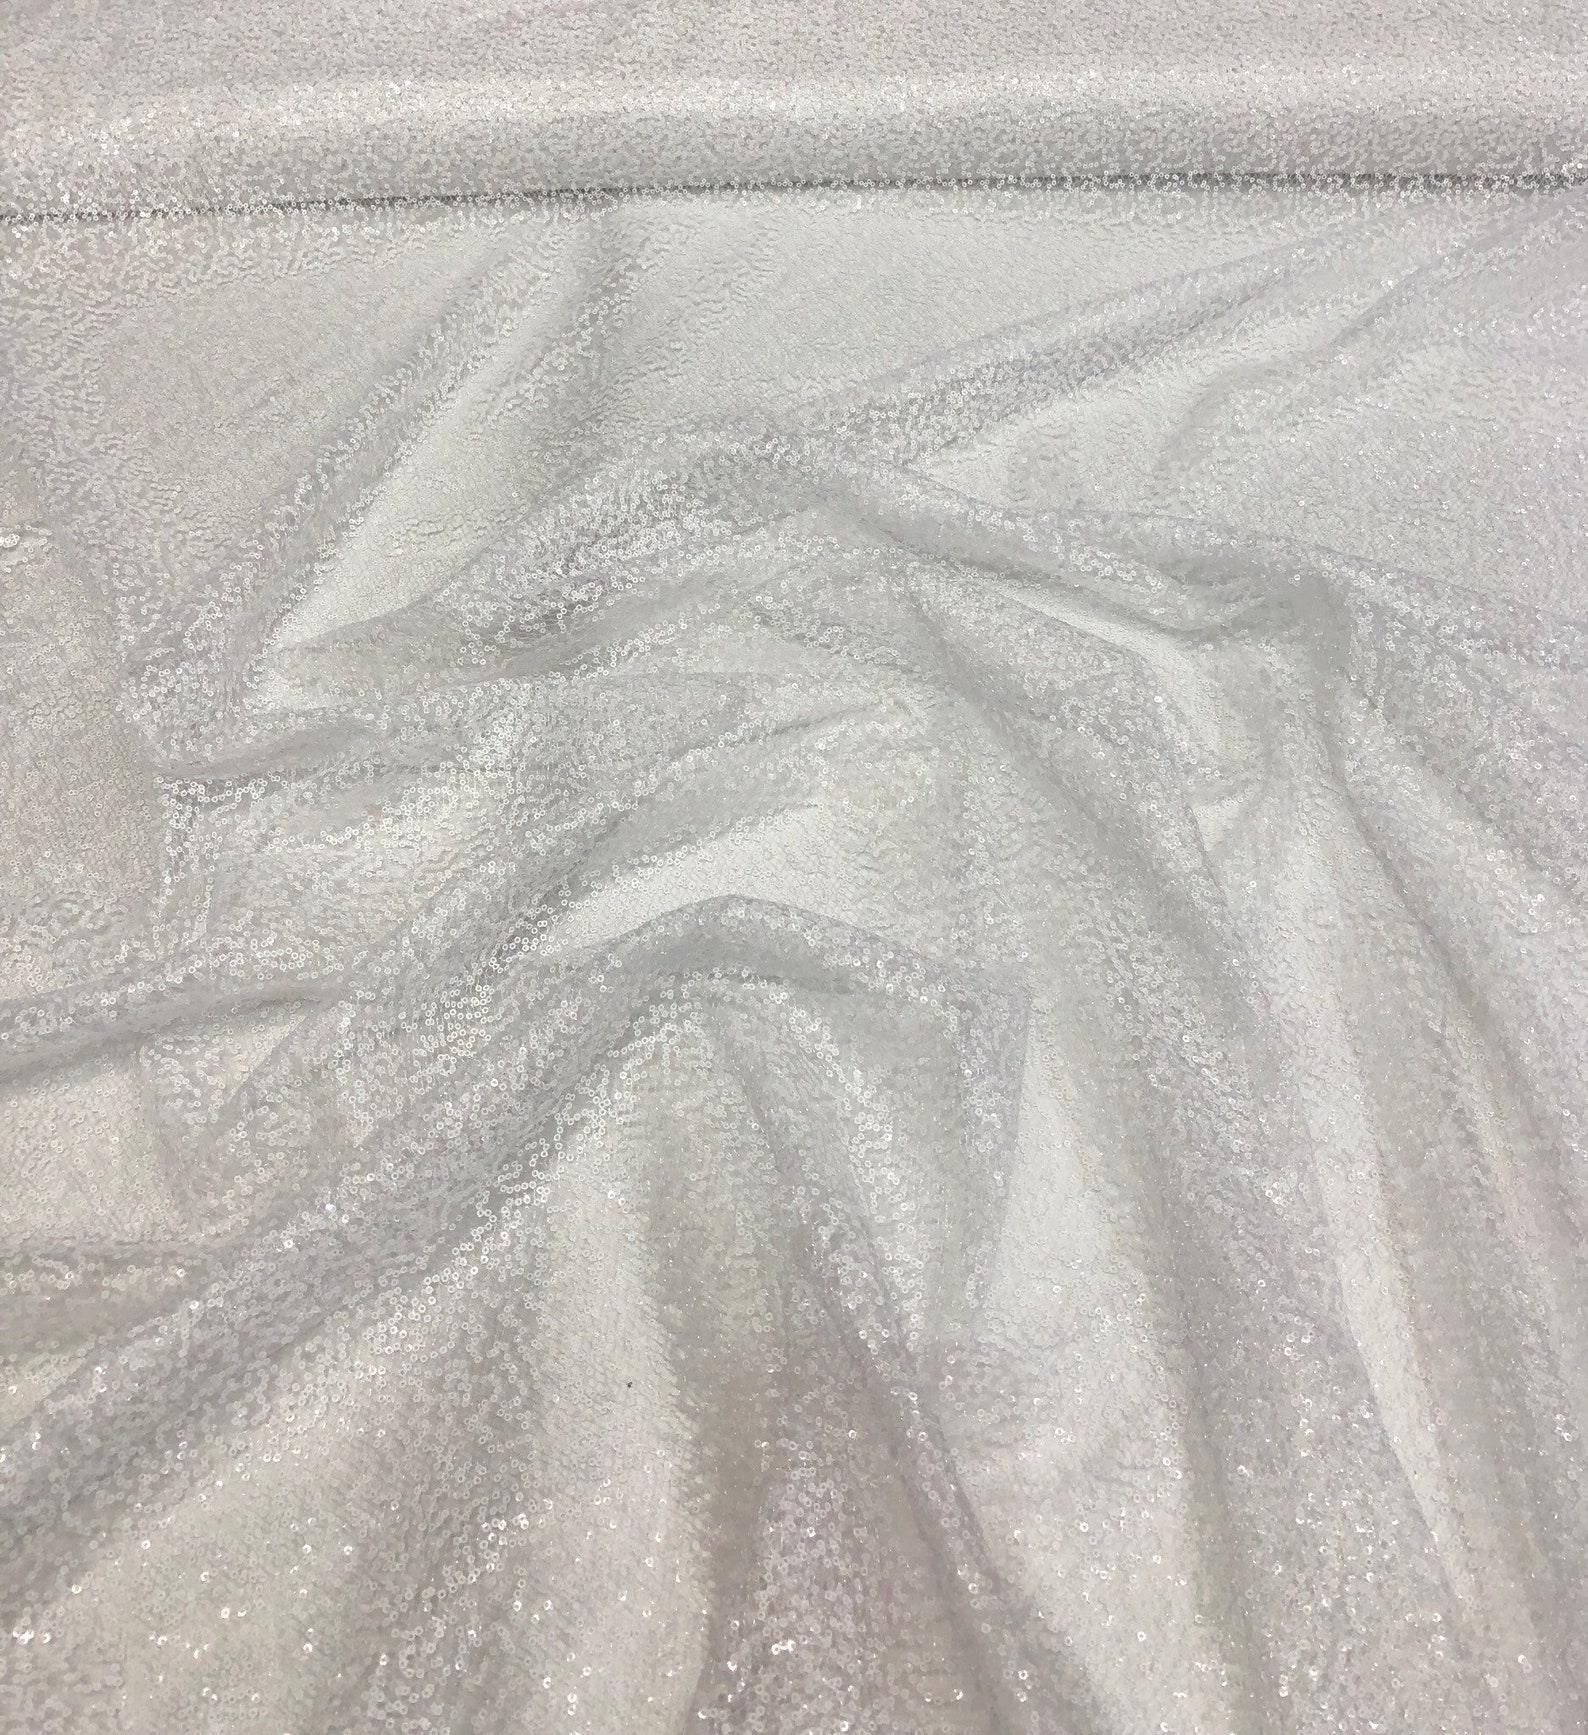 White Sequins on Sheer Swirl Mesh 52 Wide Sequins Fabric - Etsy